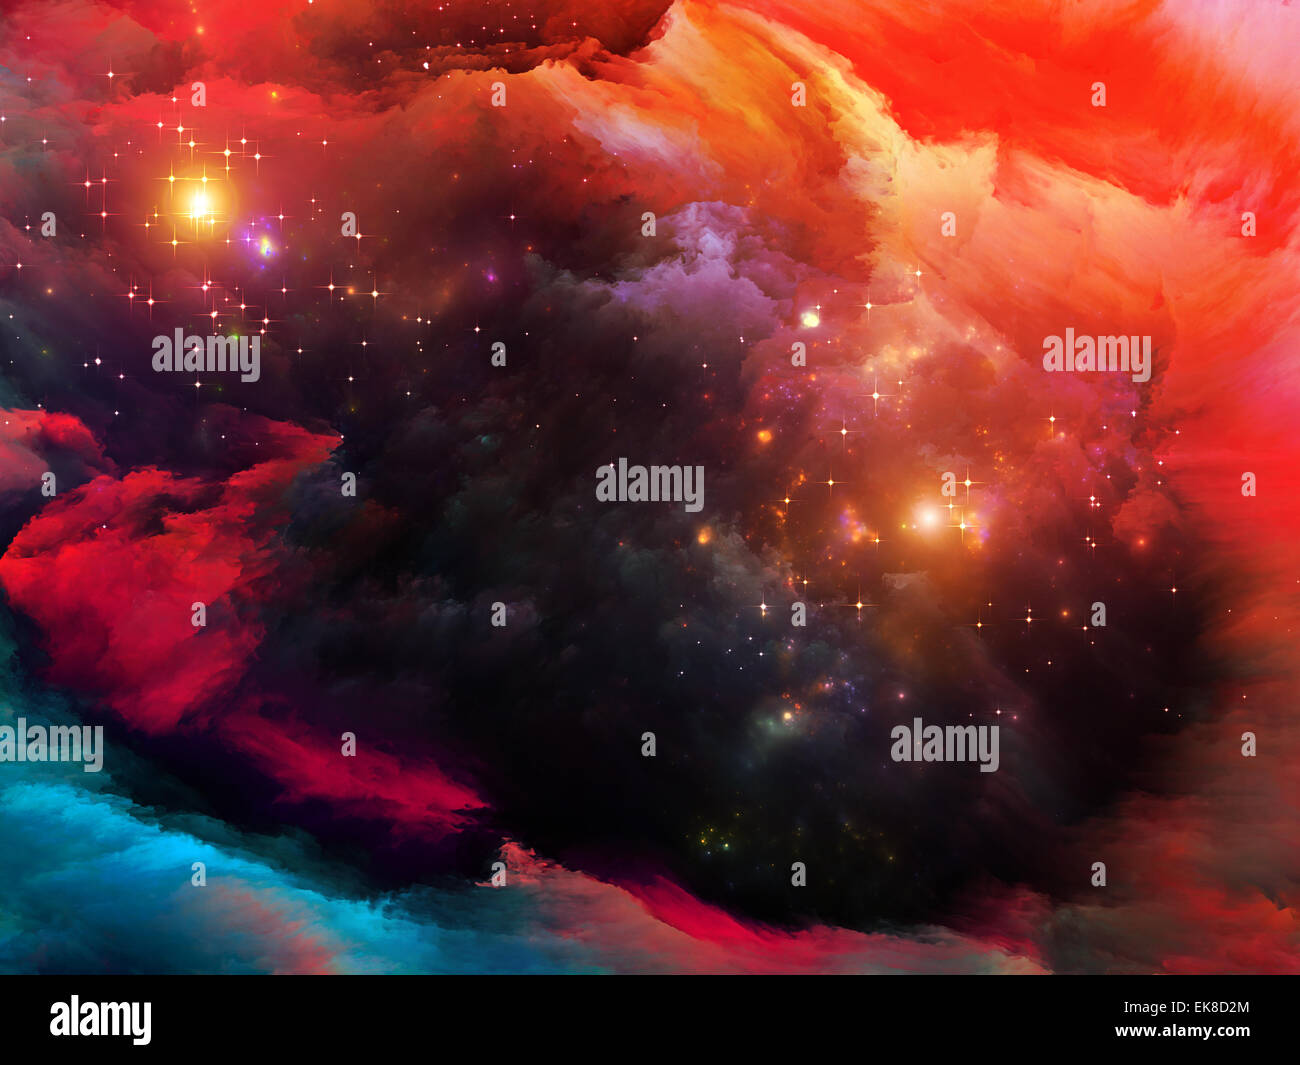 Fractal Paint Abstraction Stock Photo